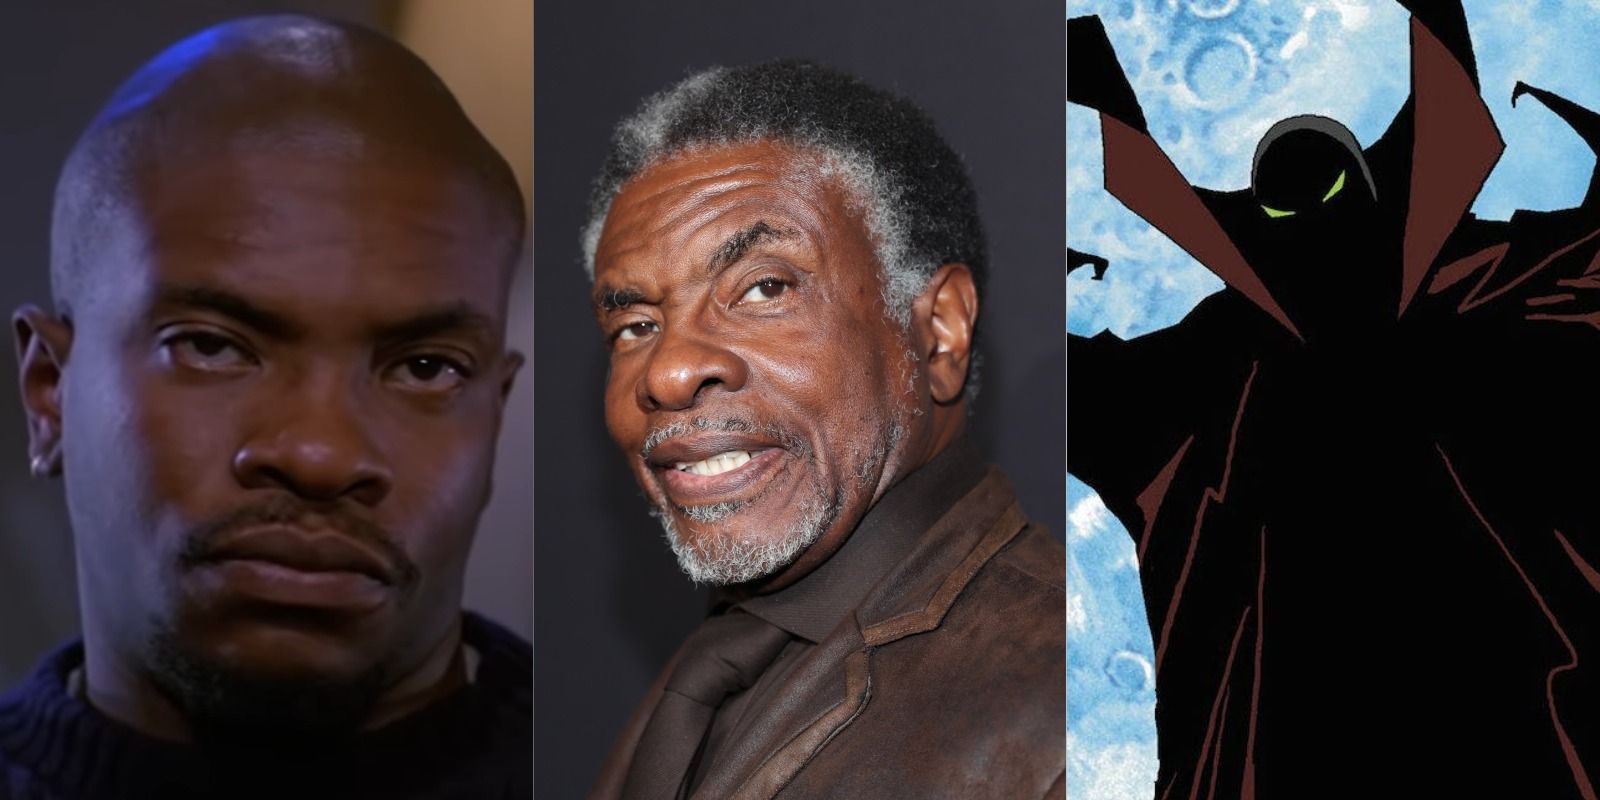 Split image of Childs from The Thing, Keith David, and Spawn from Todd McFarlane's Spawn